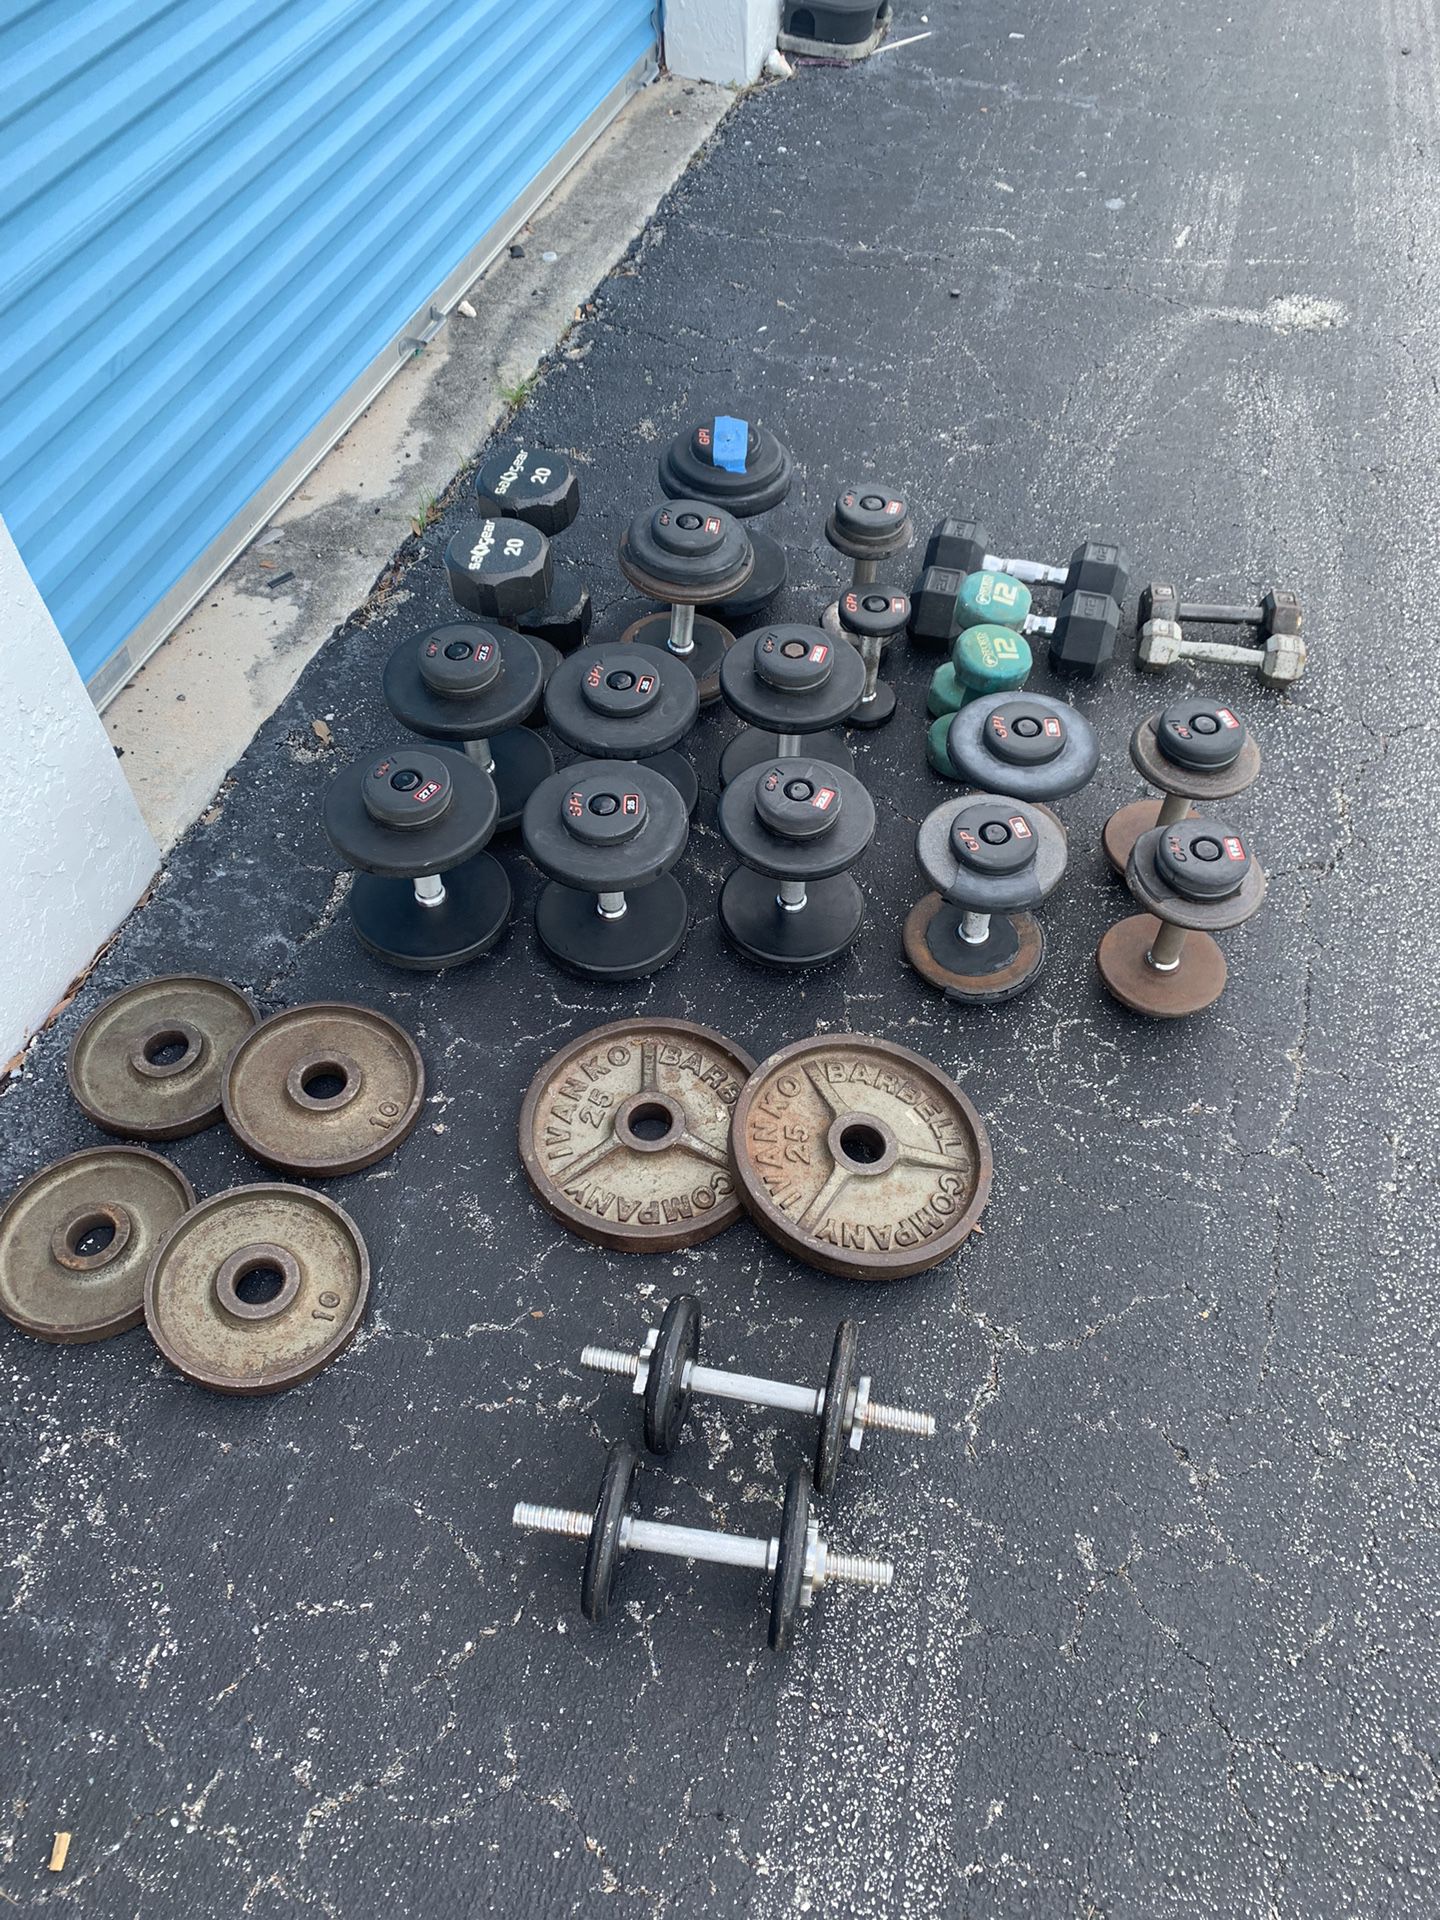 Over 530 Pounds Of Weight Lifting 🏋️‍♂️ Equipment! 